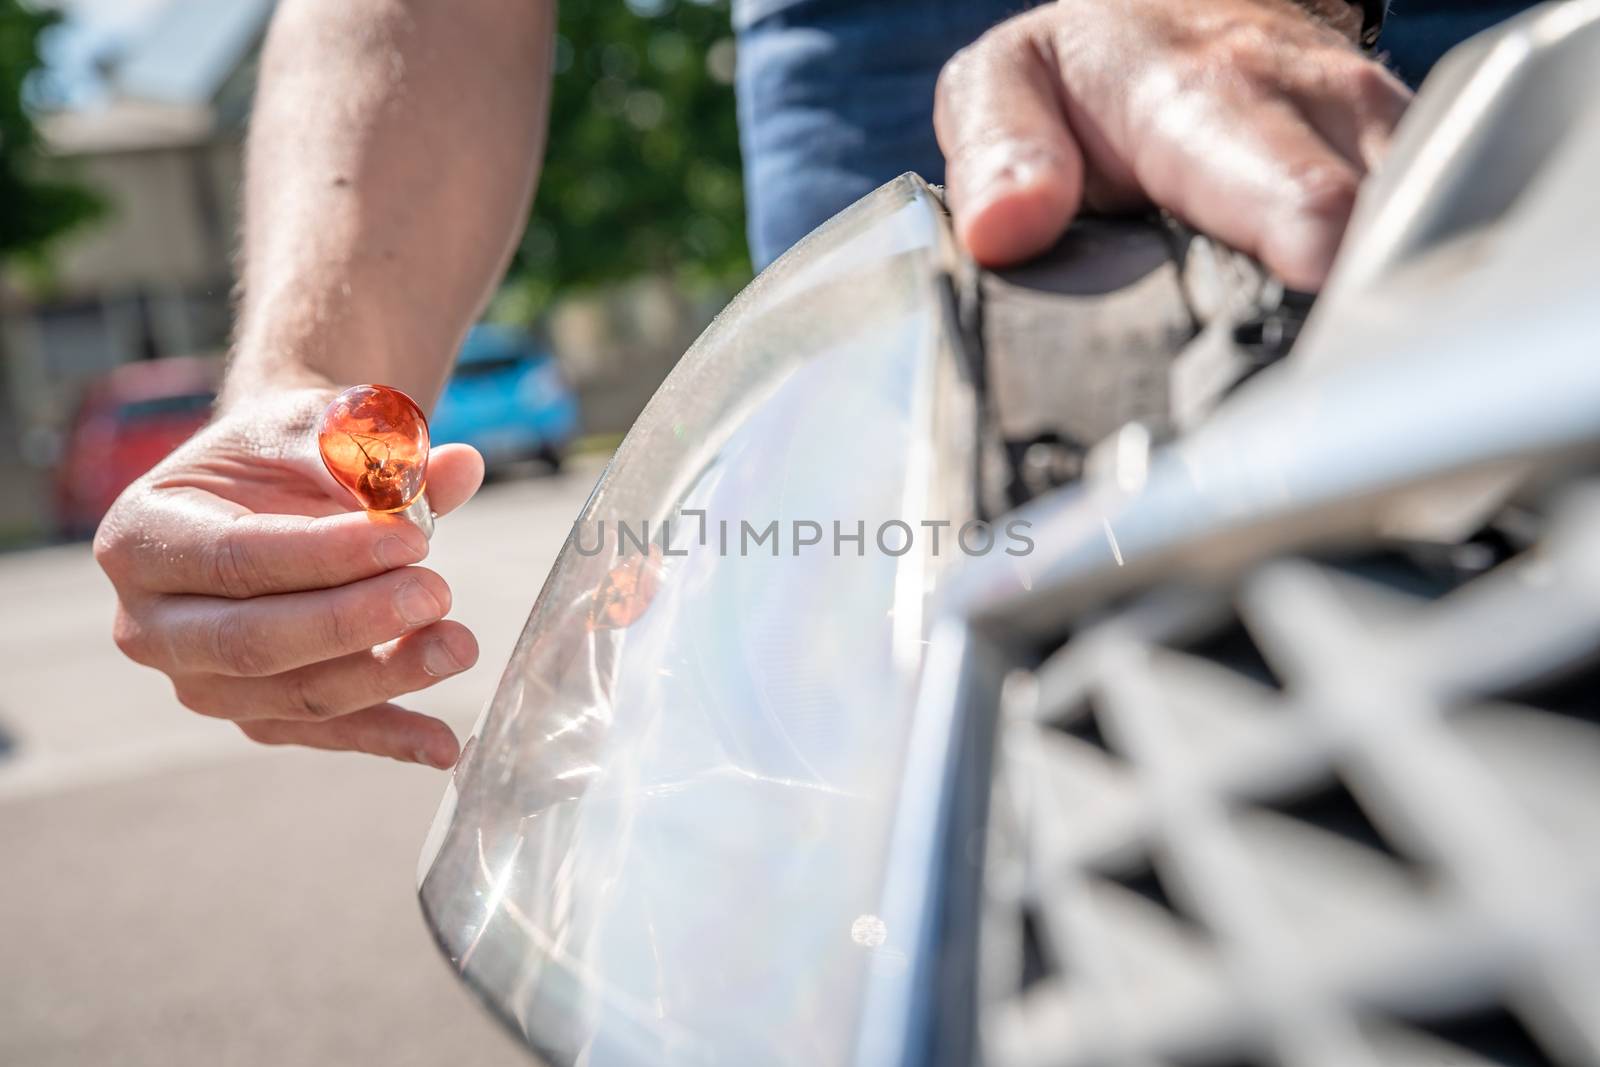 replacement of the wrong bulb with a new one in the car headlight by Edophoto